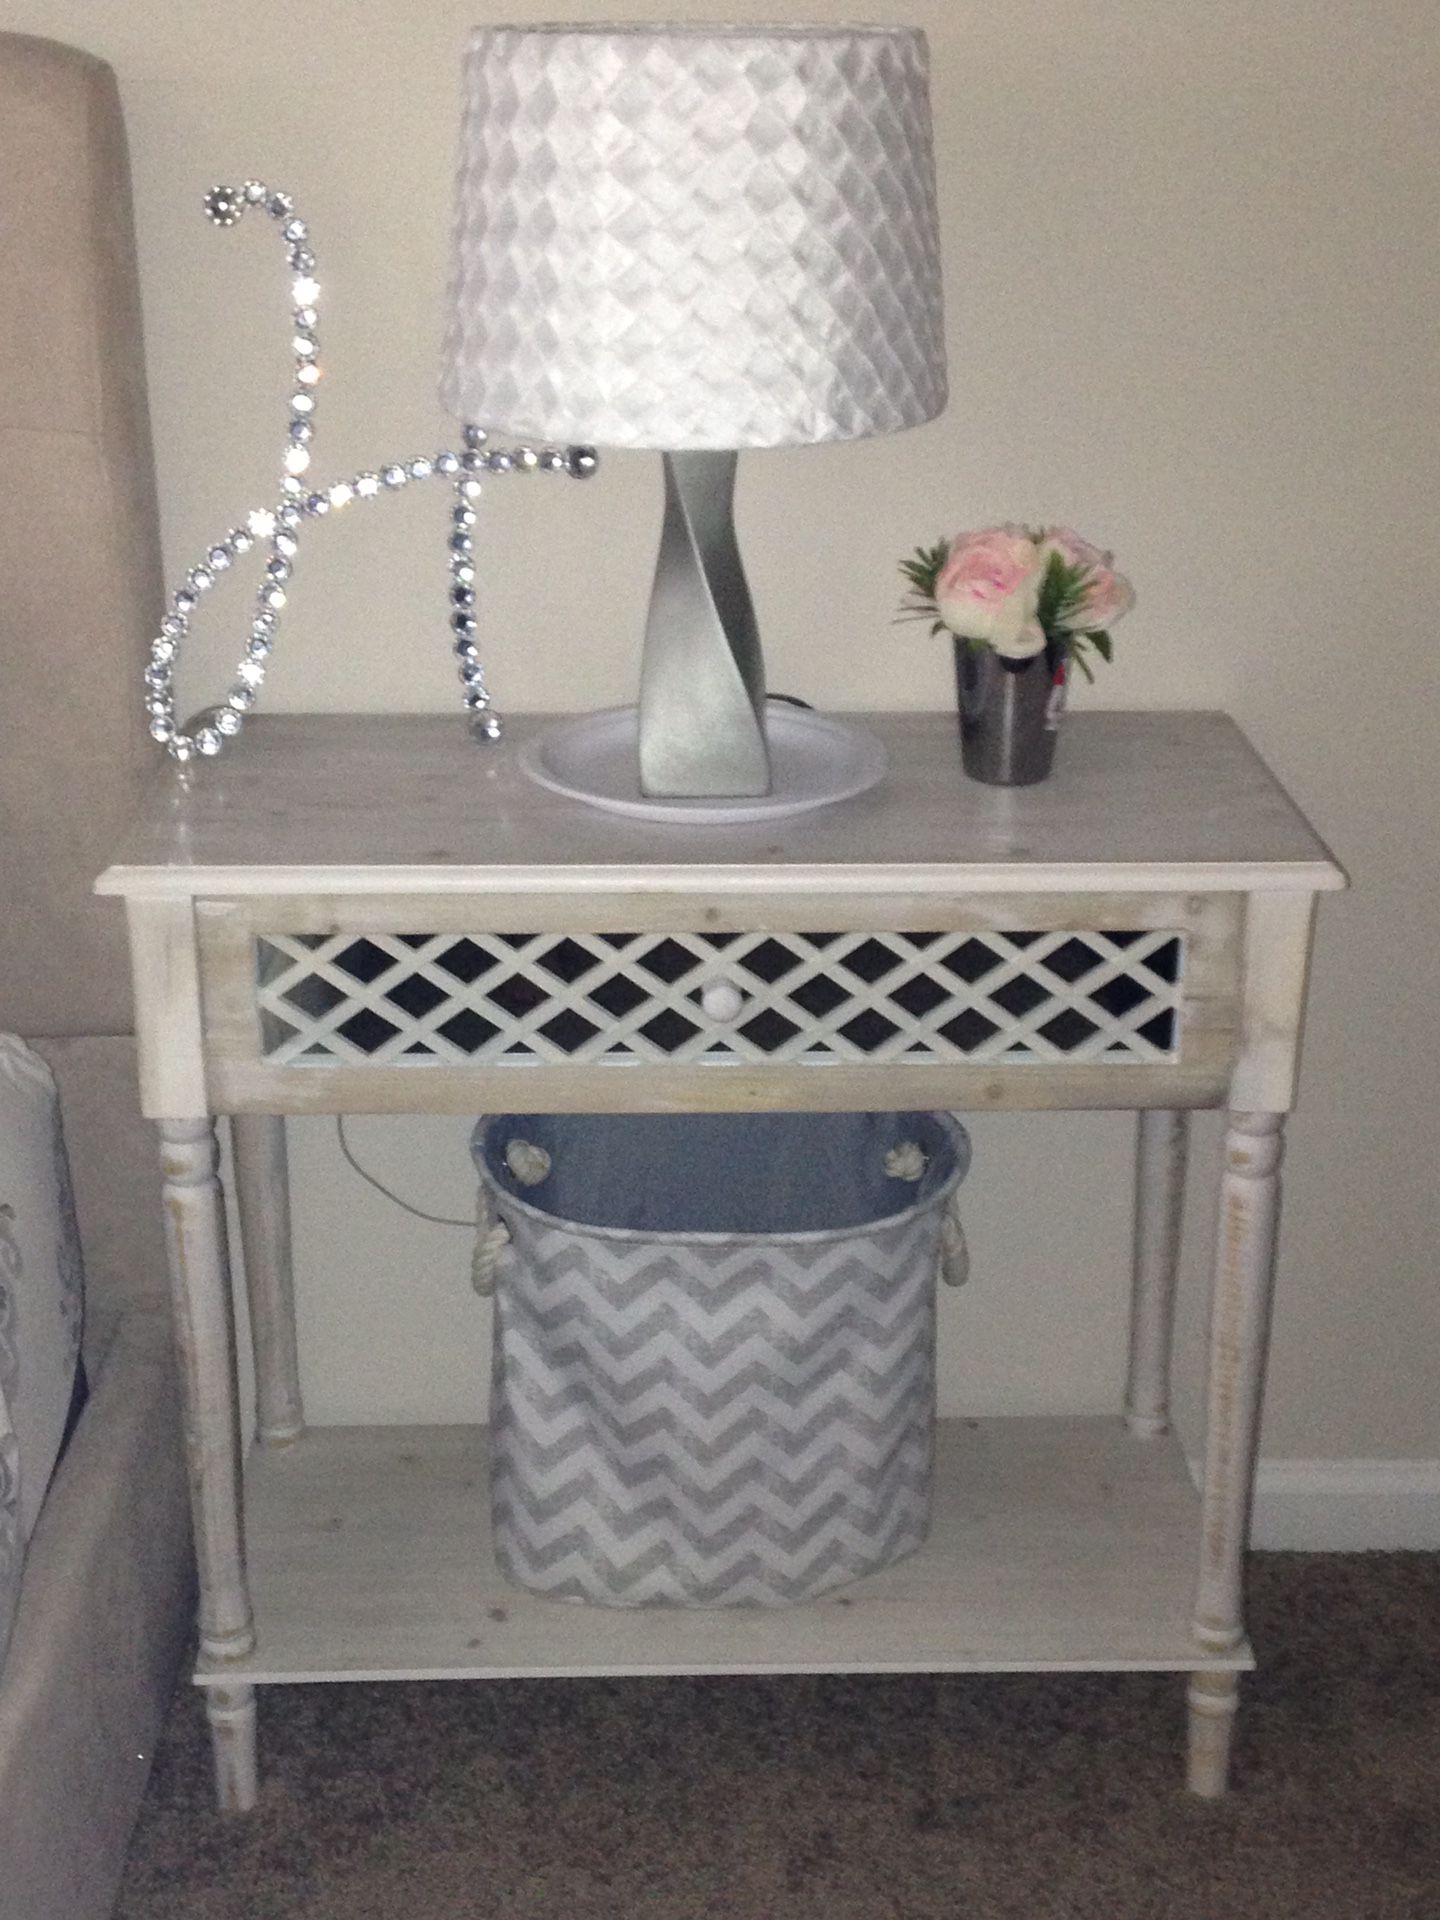 Mirror/lattice Large night stand, lamp, and basket